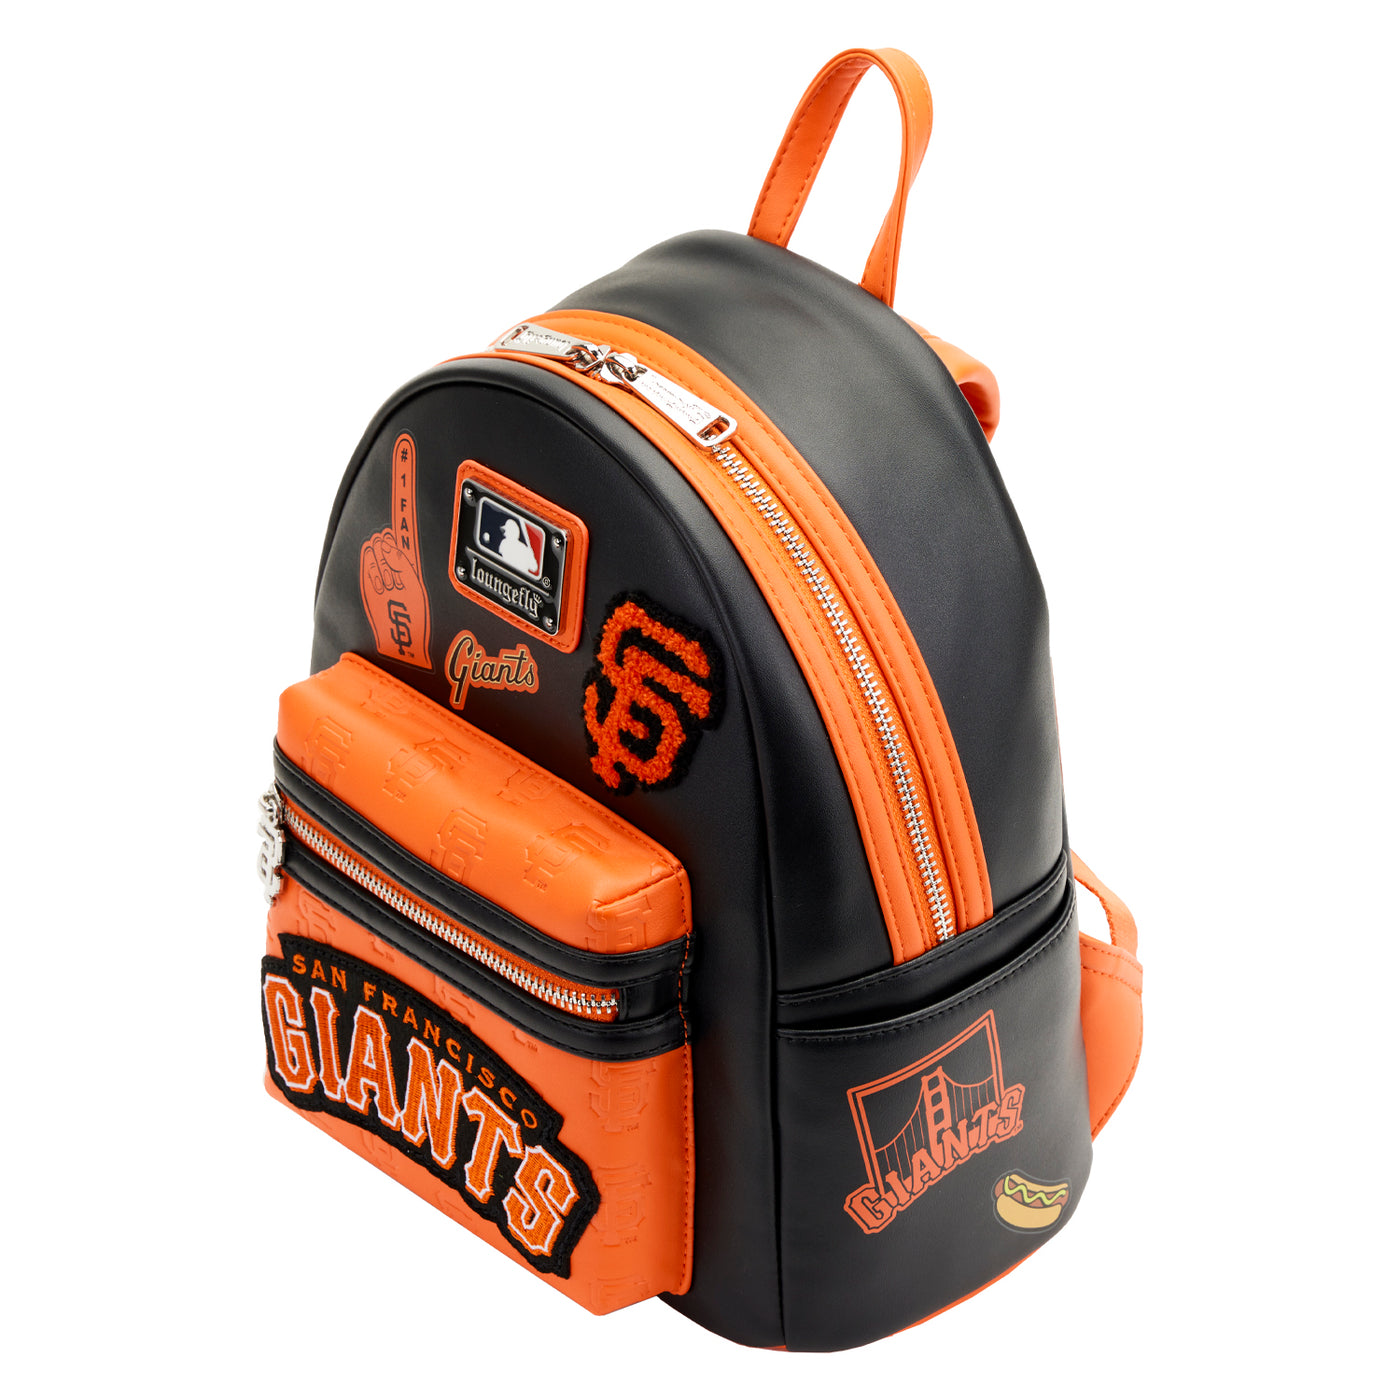 Loungefly La Dodgers Patches Mini Backpack MLB